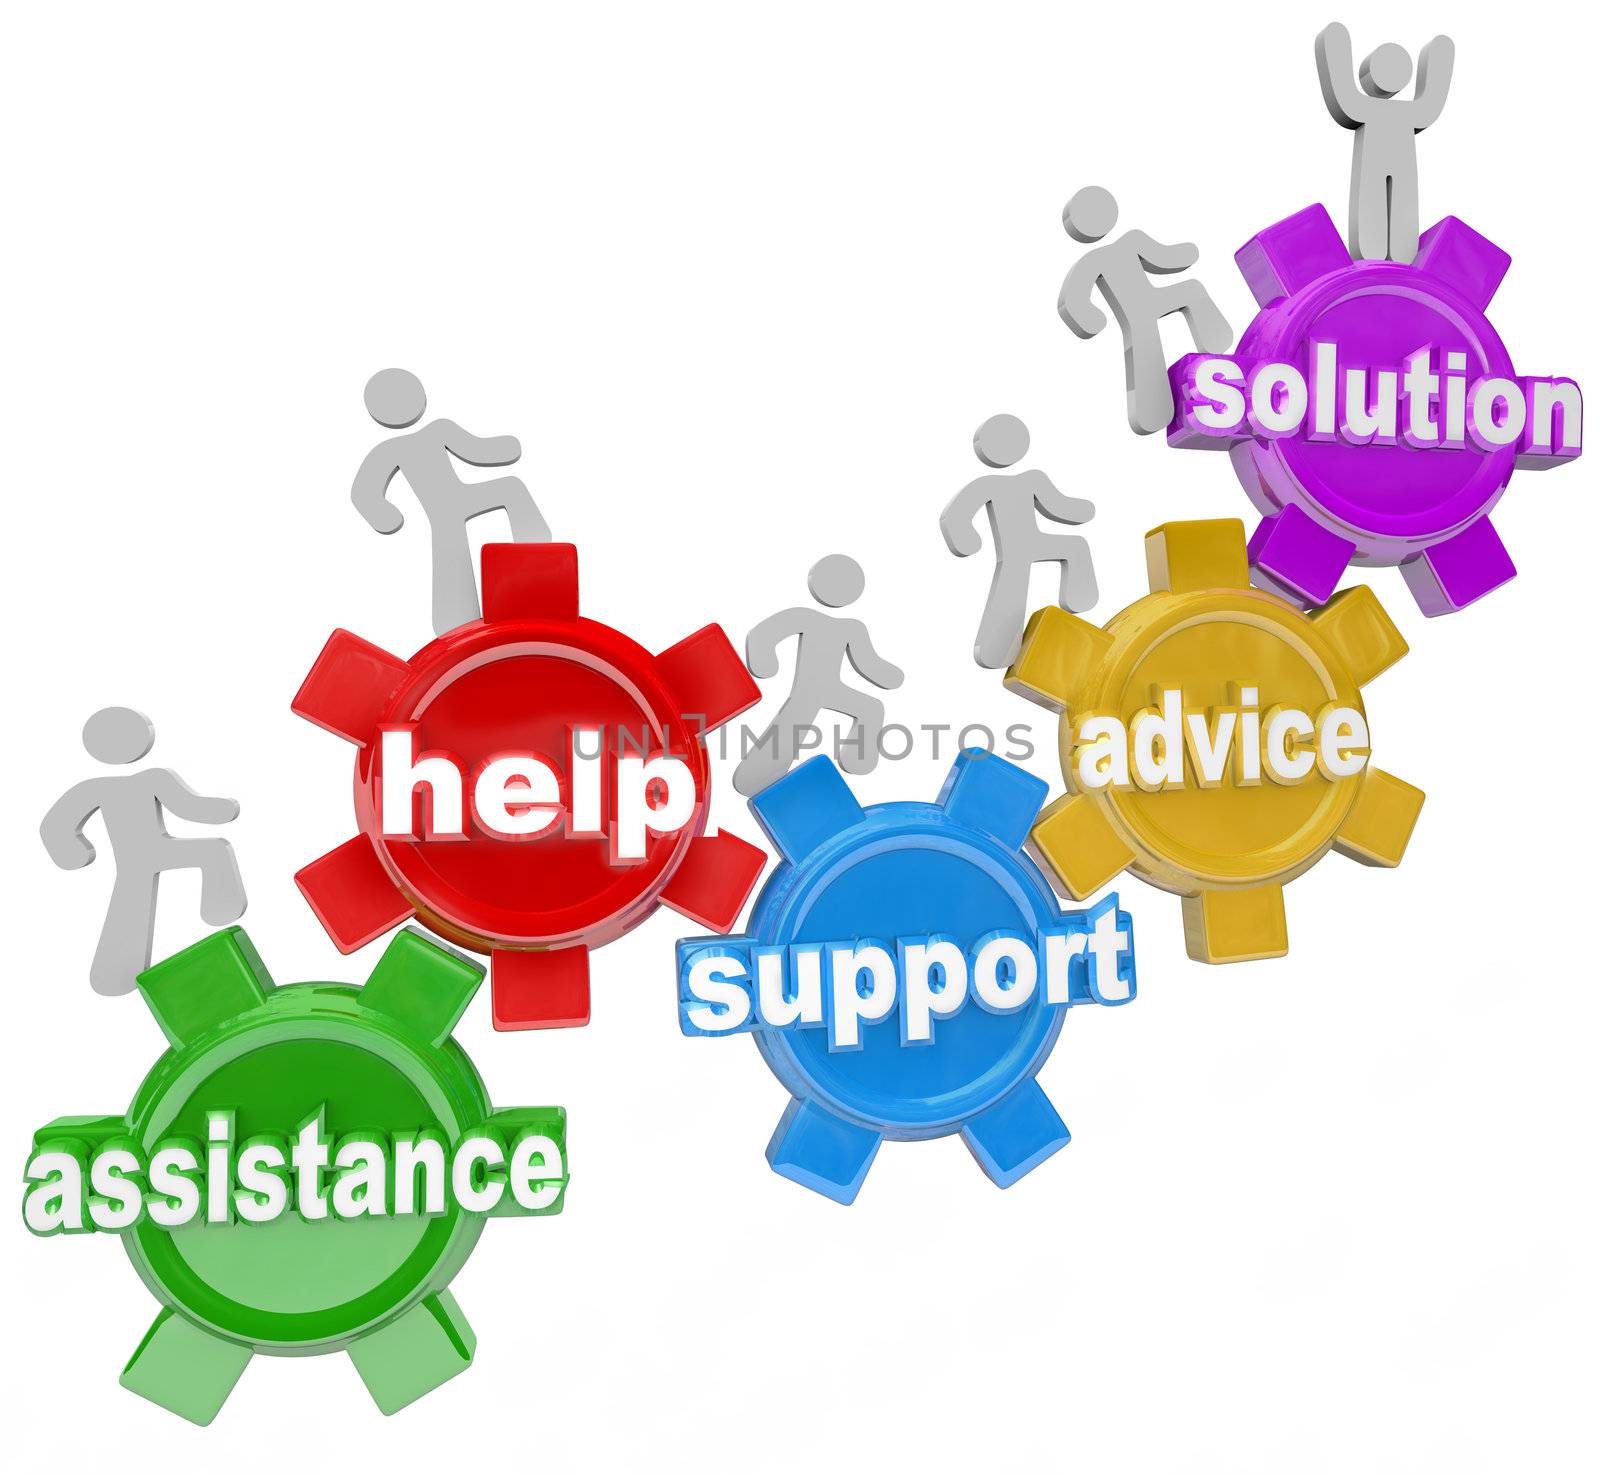 Several people rising on gears helping each other to achieve success and reach a solution through assistance, help, support and service, representing teamwork needed to achieve a goal